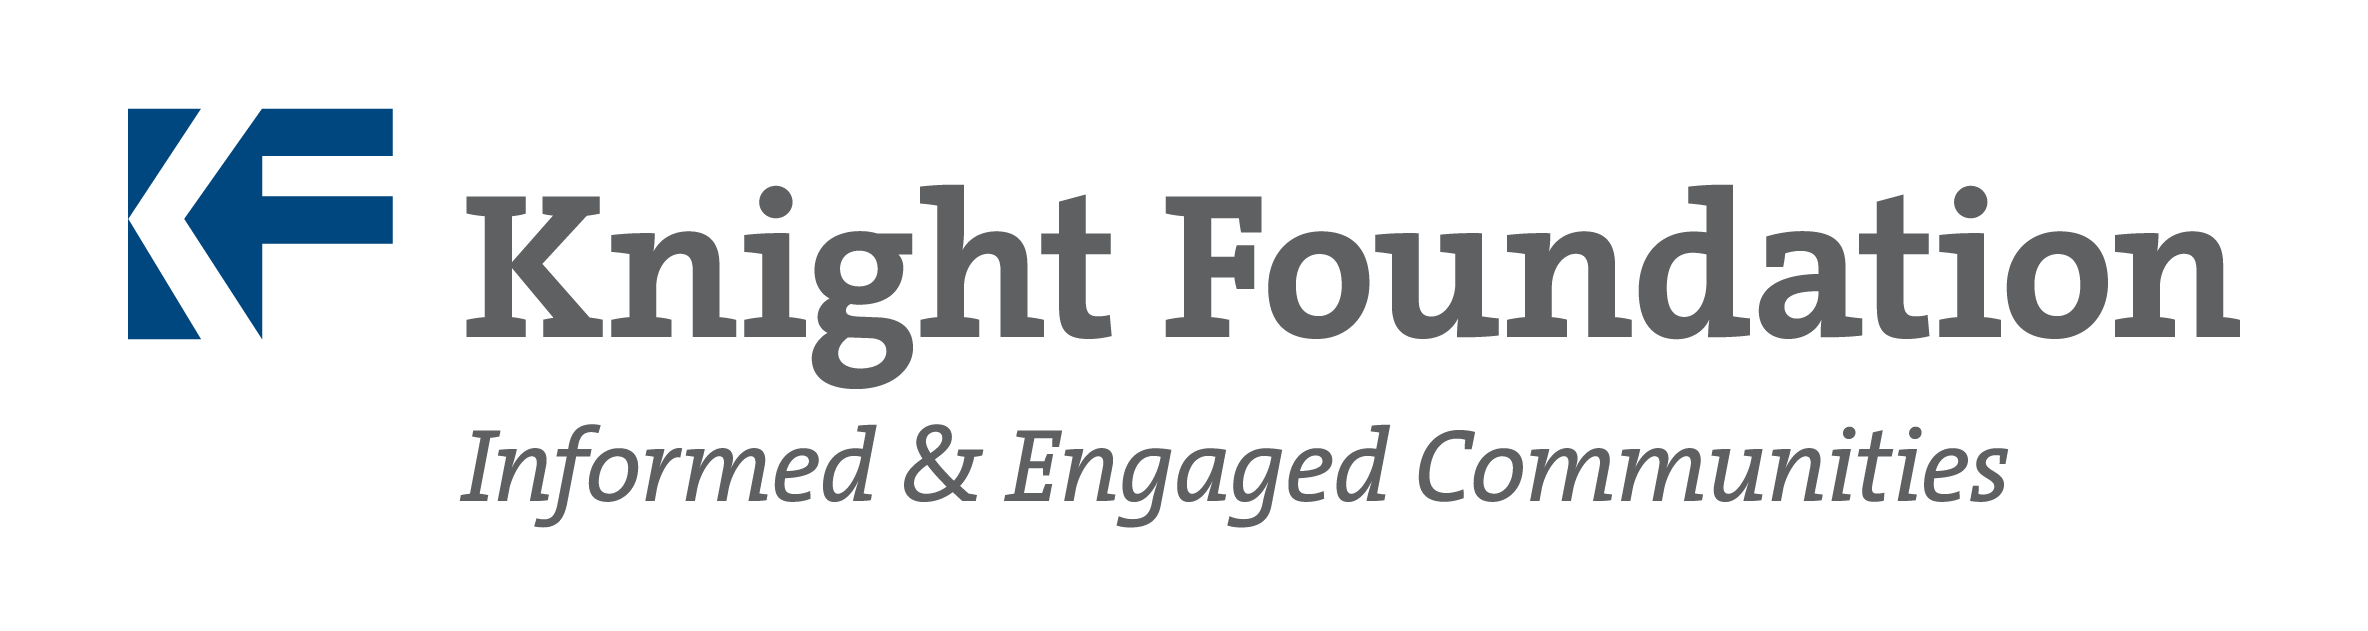 client_knight foundation.png